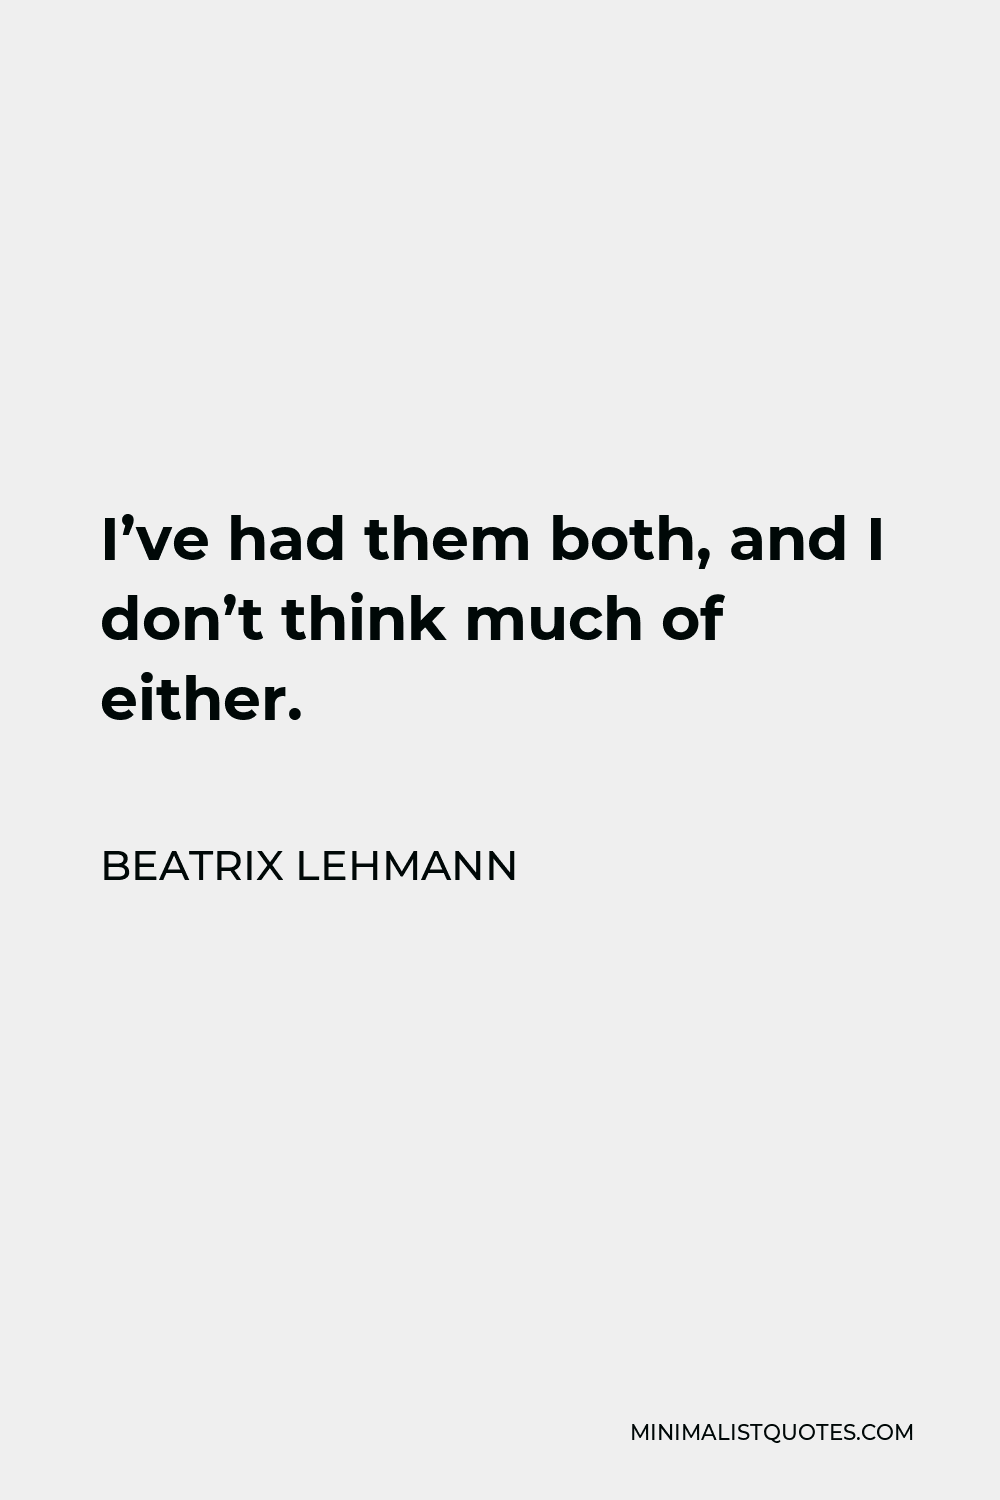 Beatrix Lehmann Quote - I’ve had them both, and I don’t think much of either.